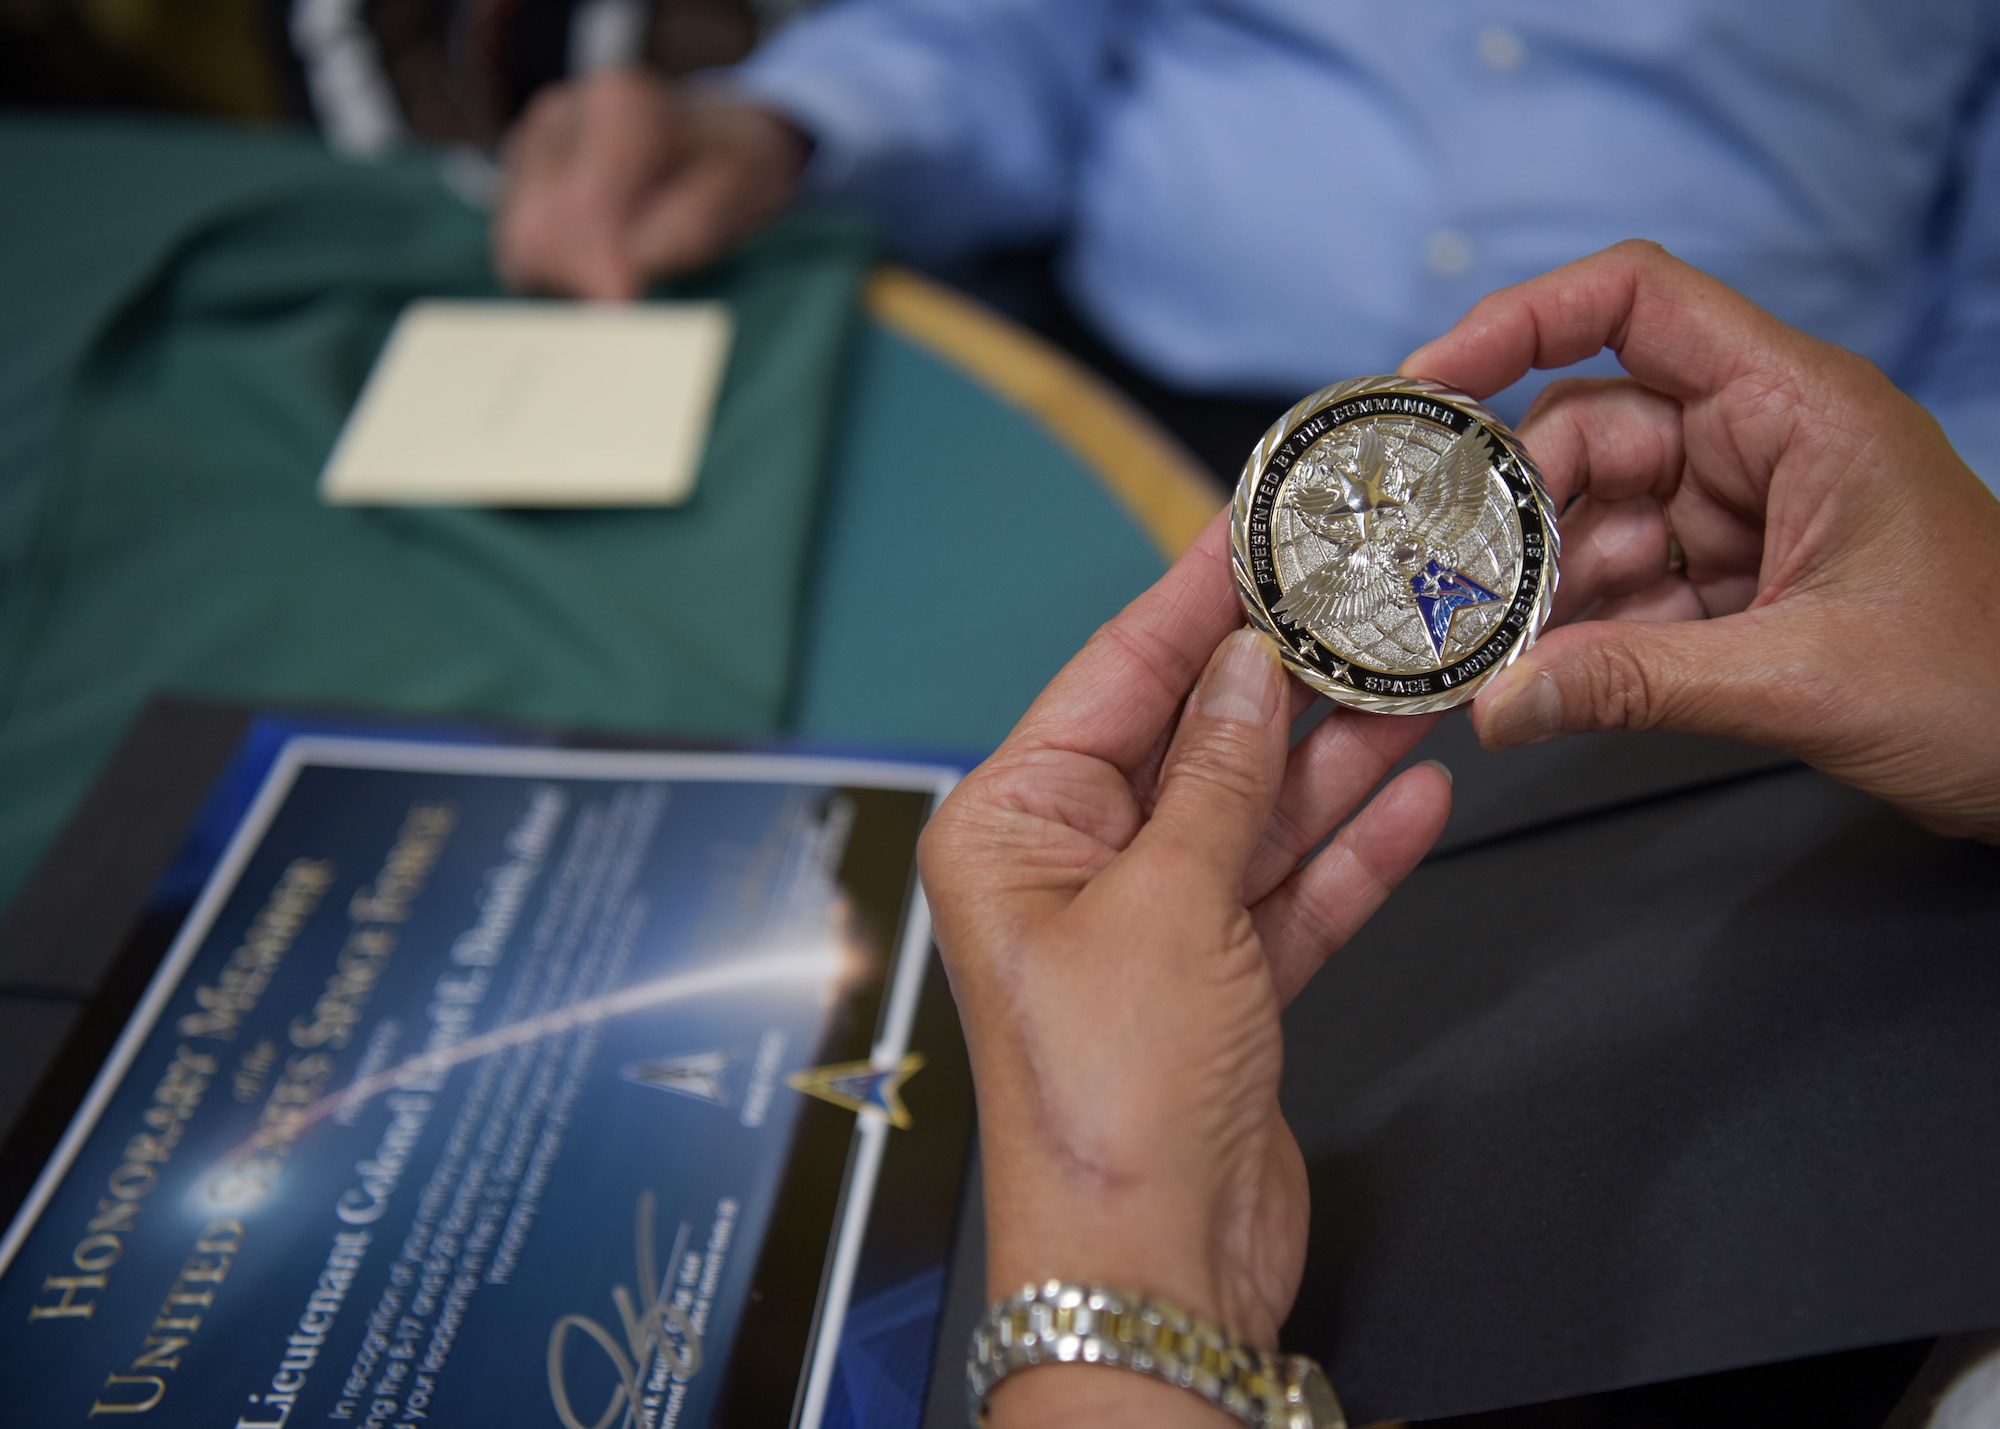 Family members admire the coin and certificate presented to Lt. Col. Lloyd Daniels, retired Air Force veteran, at his 100th birthday celebration in Orcutt, California, July 16, 2021. Daniels received a coin and an “Honorary Member of the United States Space Force” certificate from Col. Robert Long, Space Launch Delta 30 commander. (U.S. Space Force photo by Airman Kadielle Shaw)